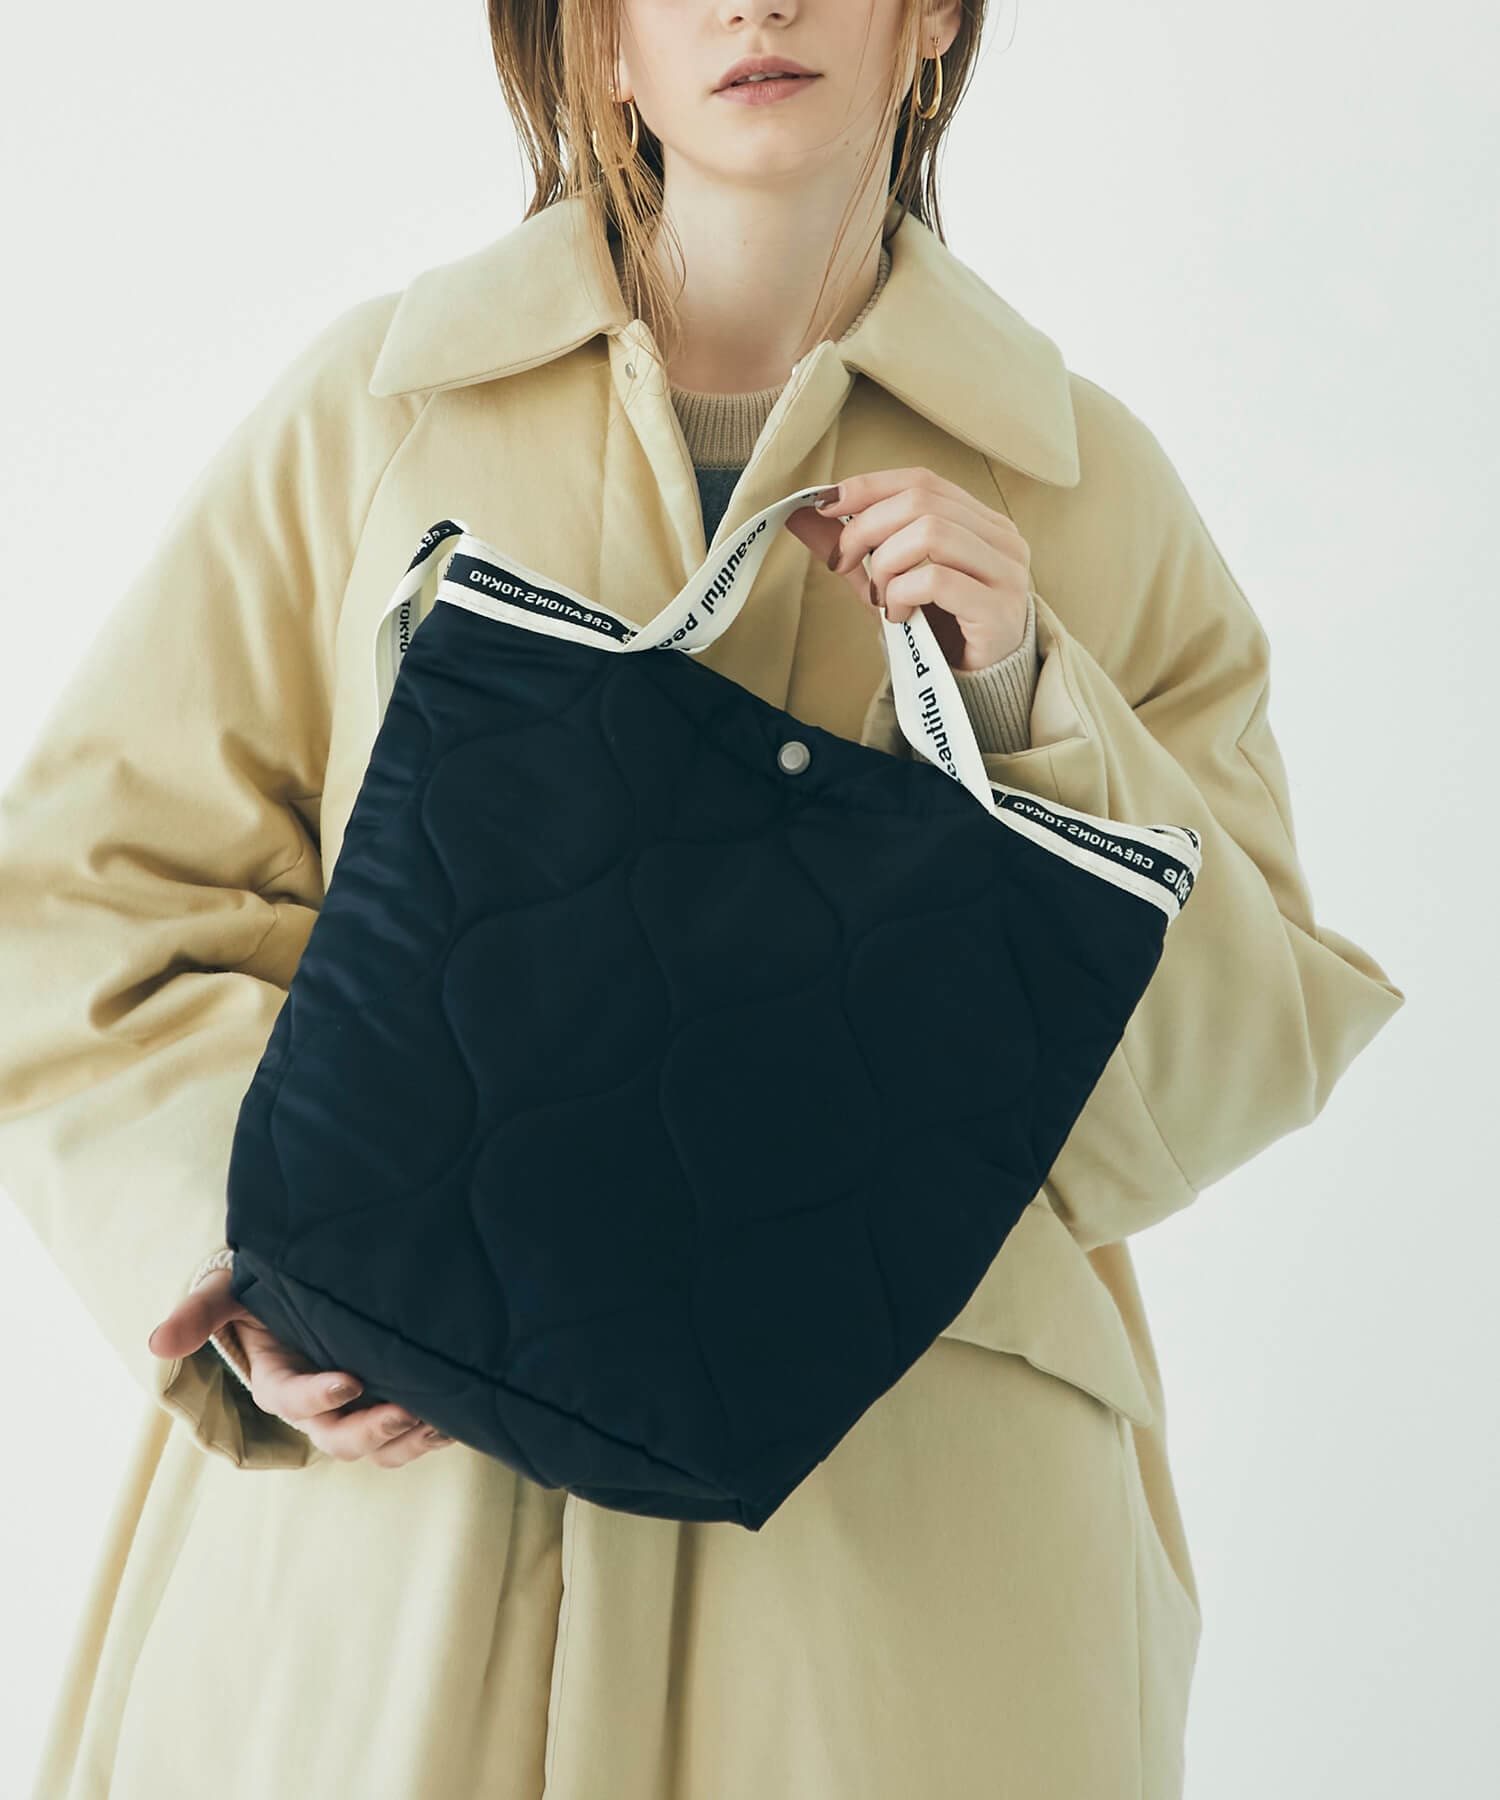 beautiful people EXCLUSIVE BAG｜ STUDIOUS ONLINE公式通販サイト